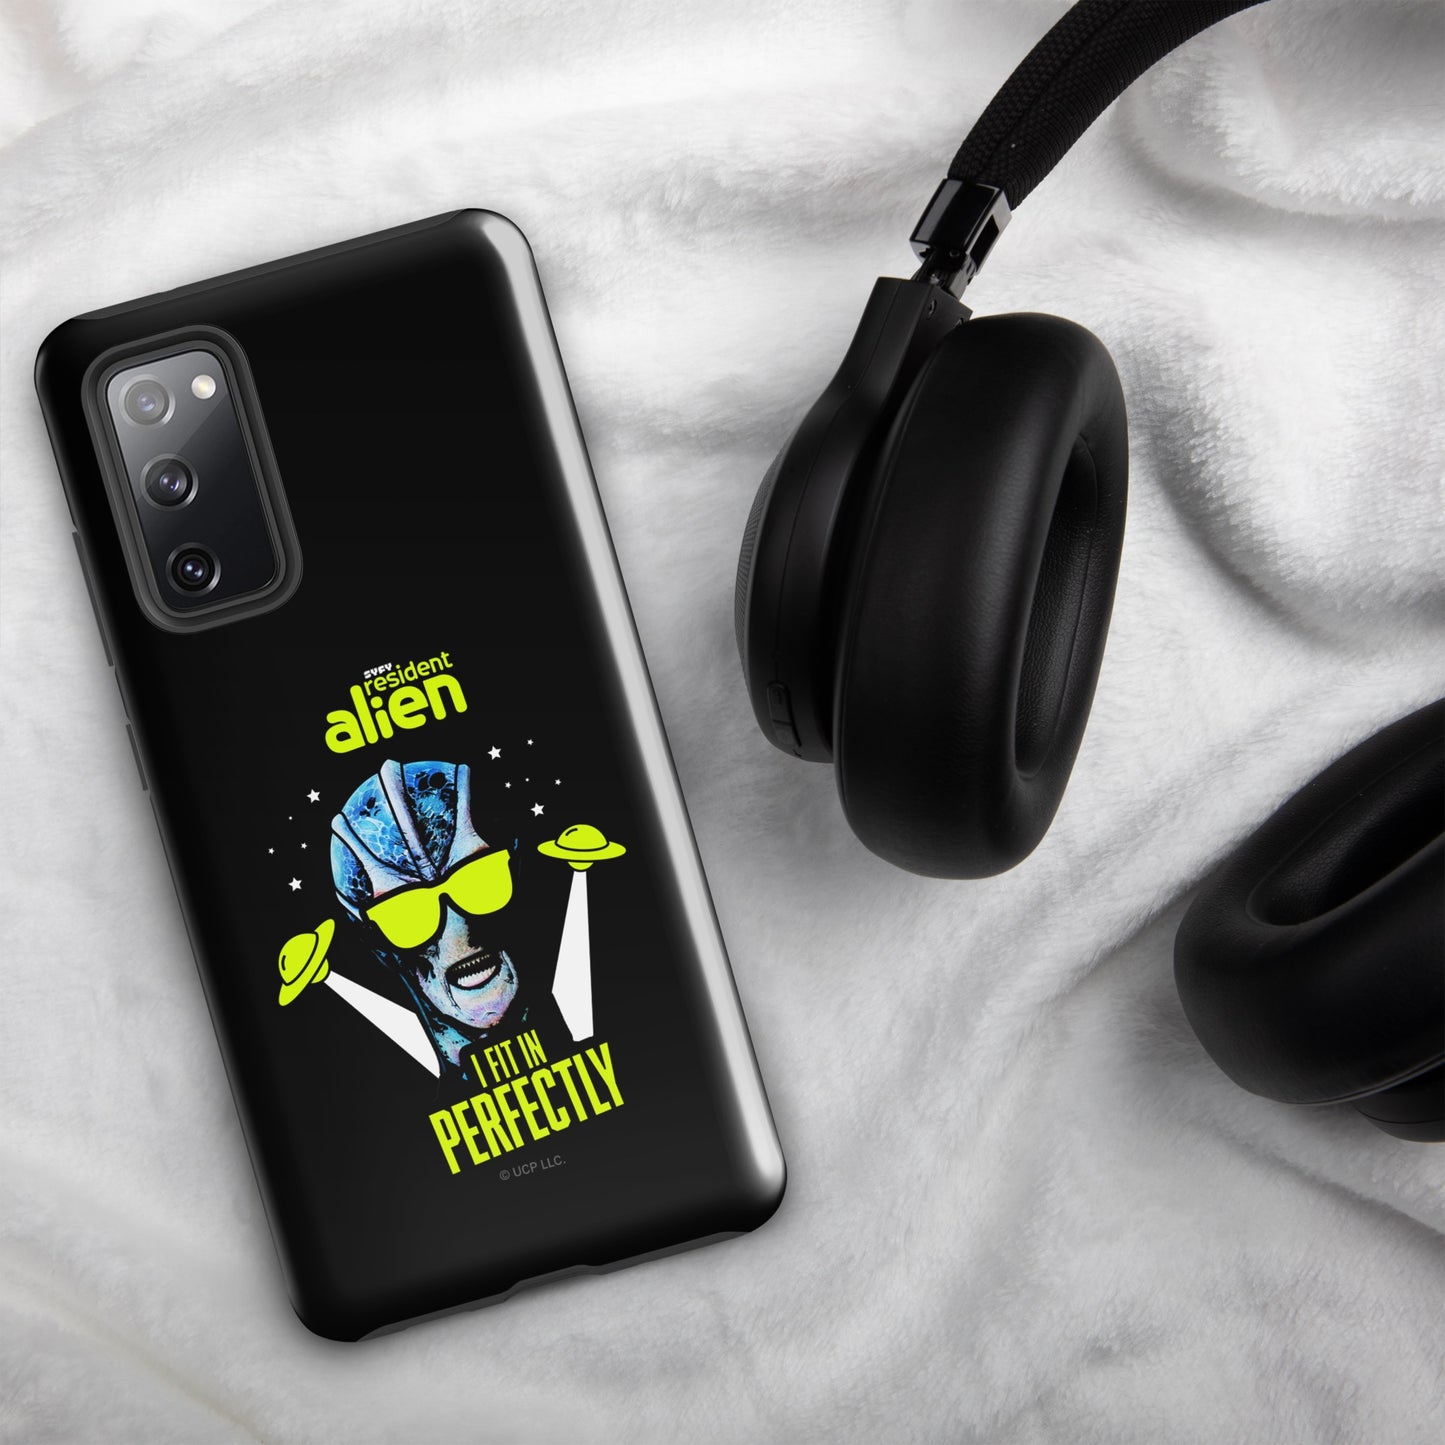 Resident Alien I Fit In Perfectly Samsung Phone Case